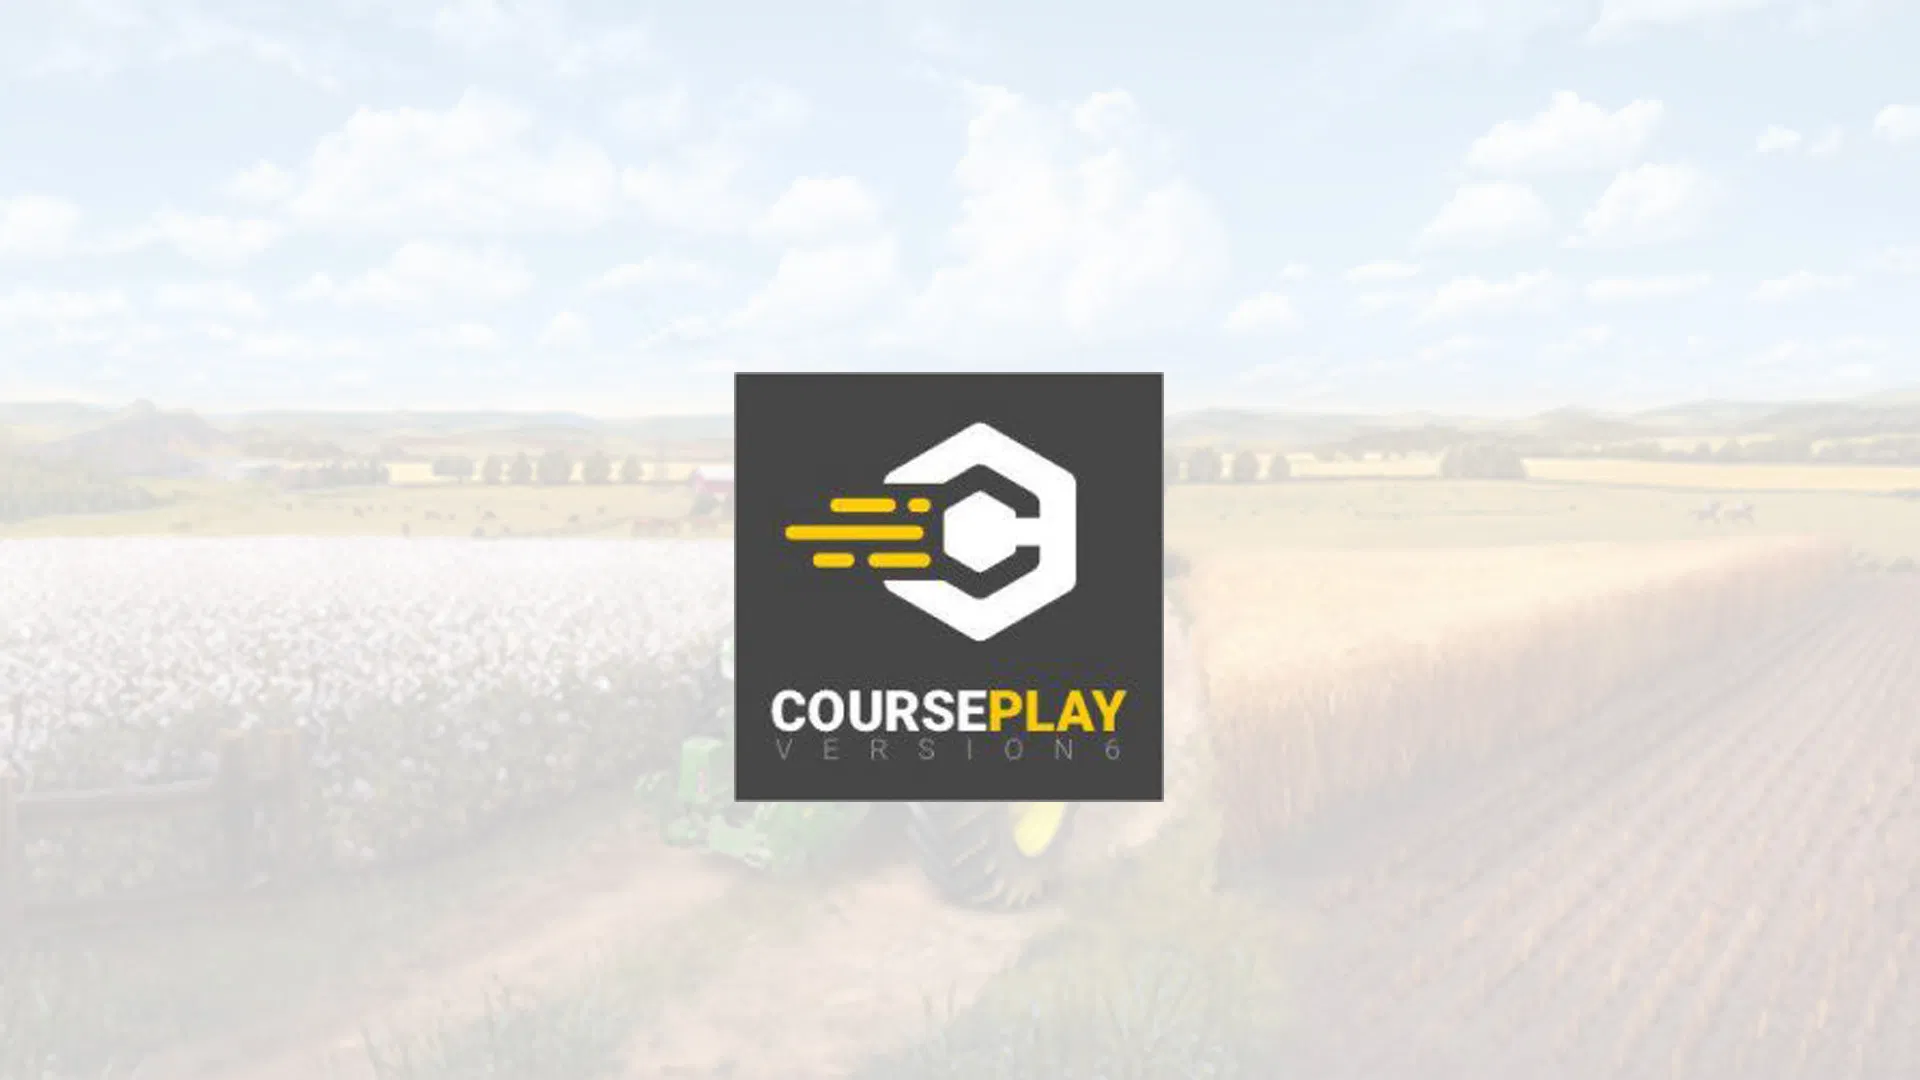 COURSEPLAY